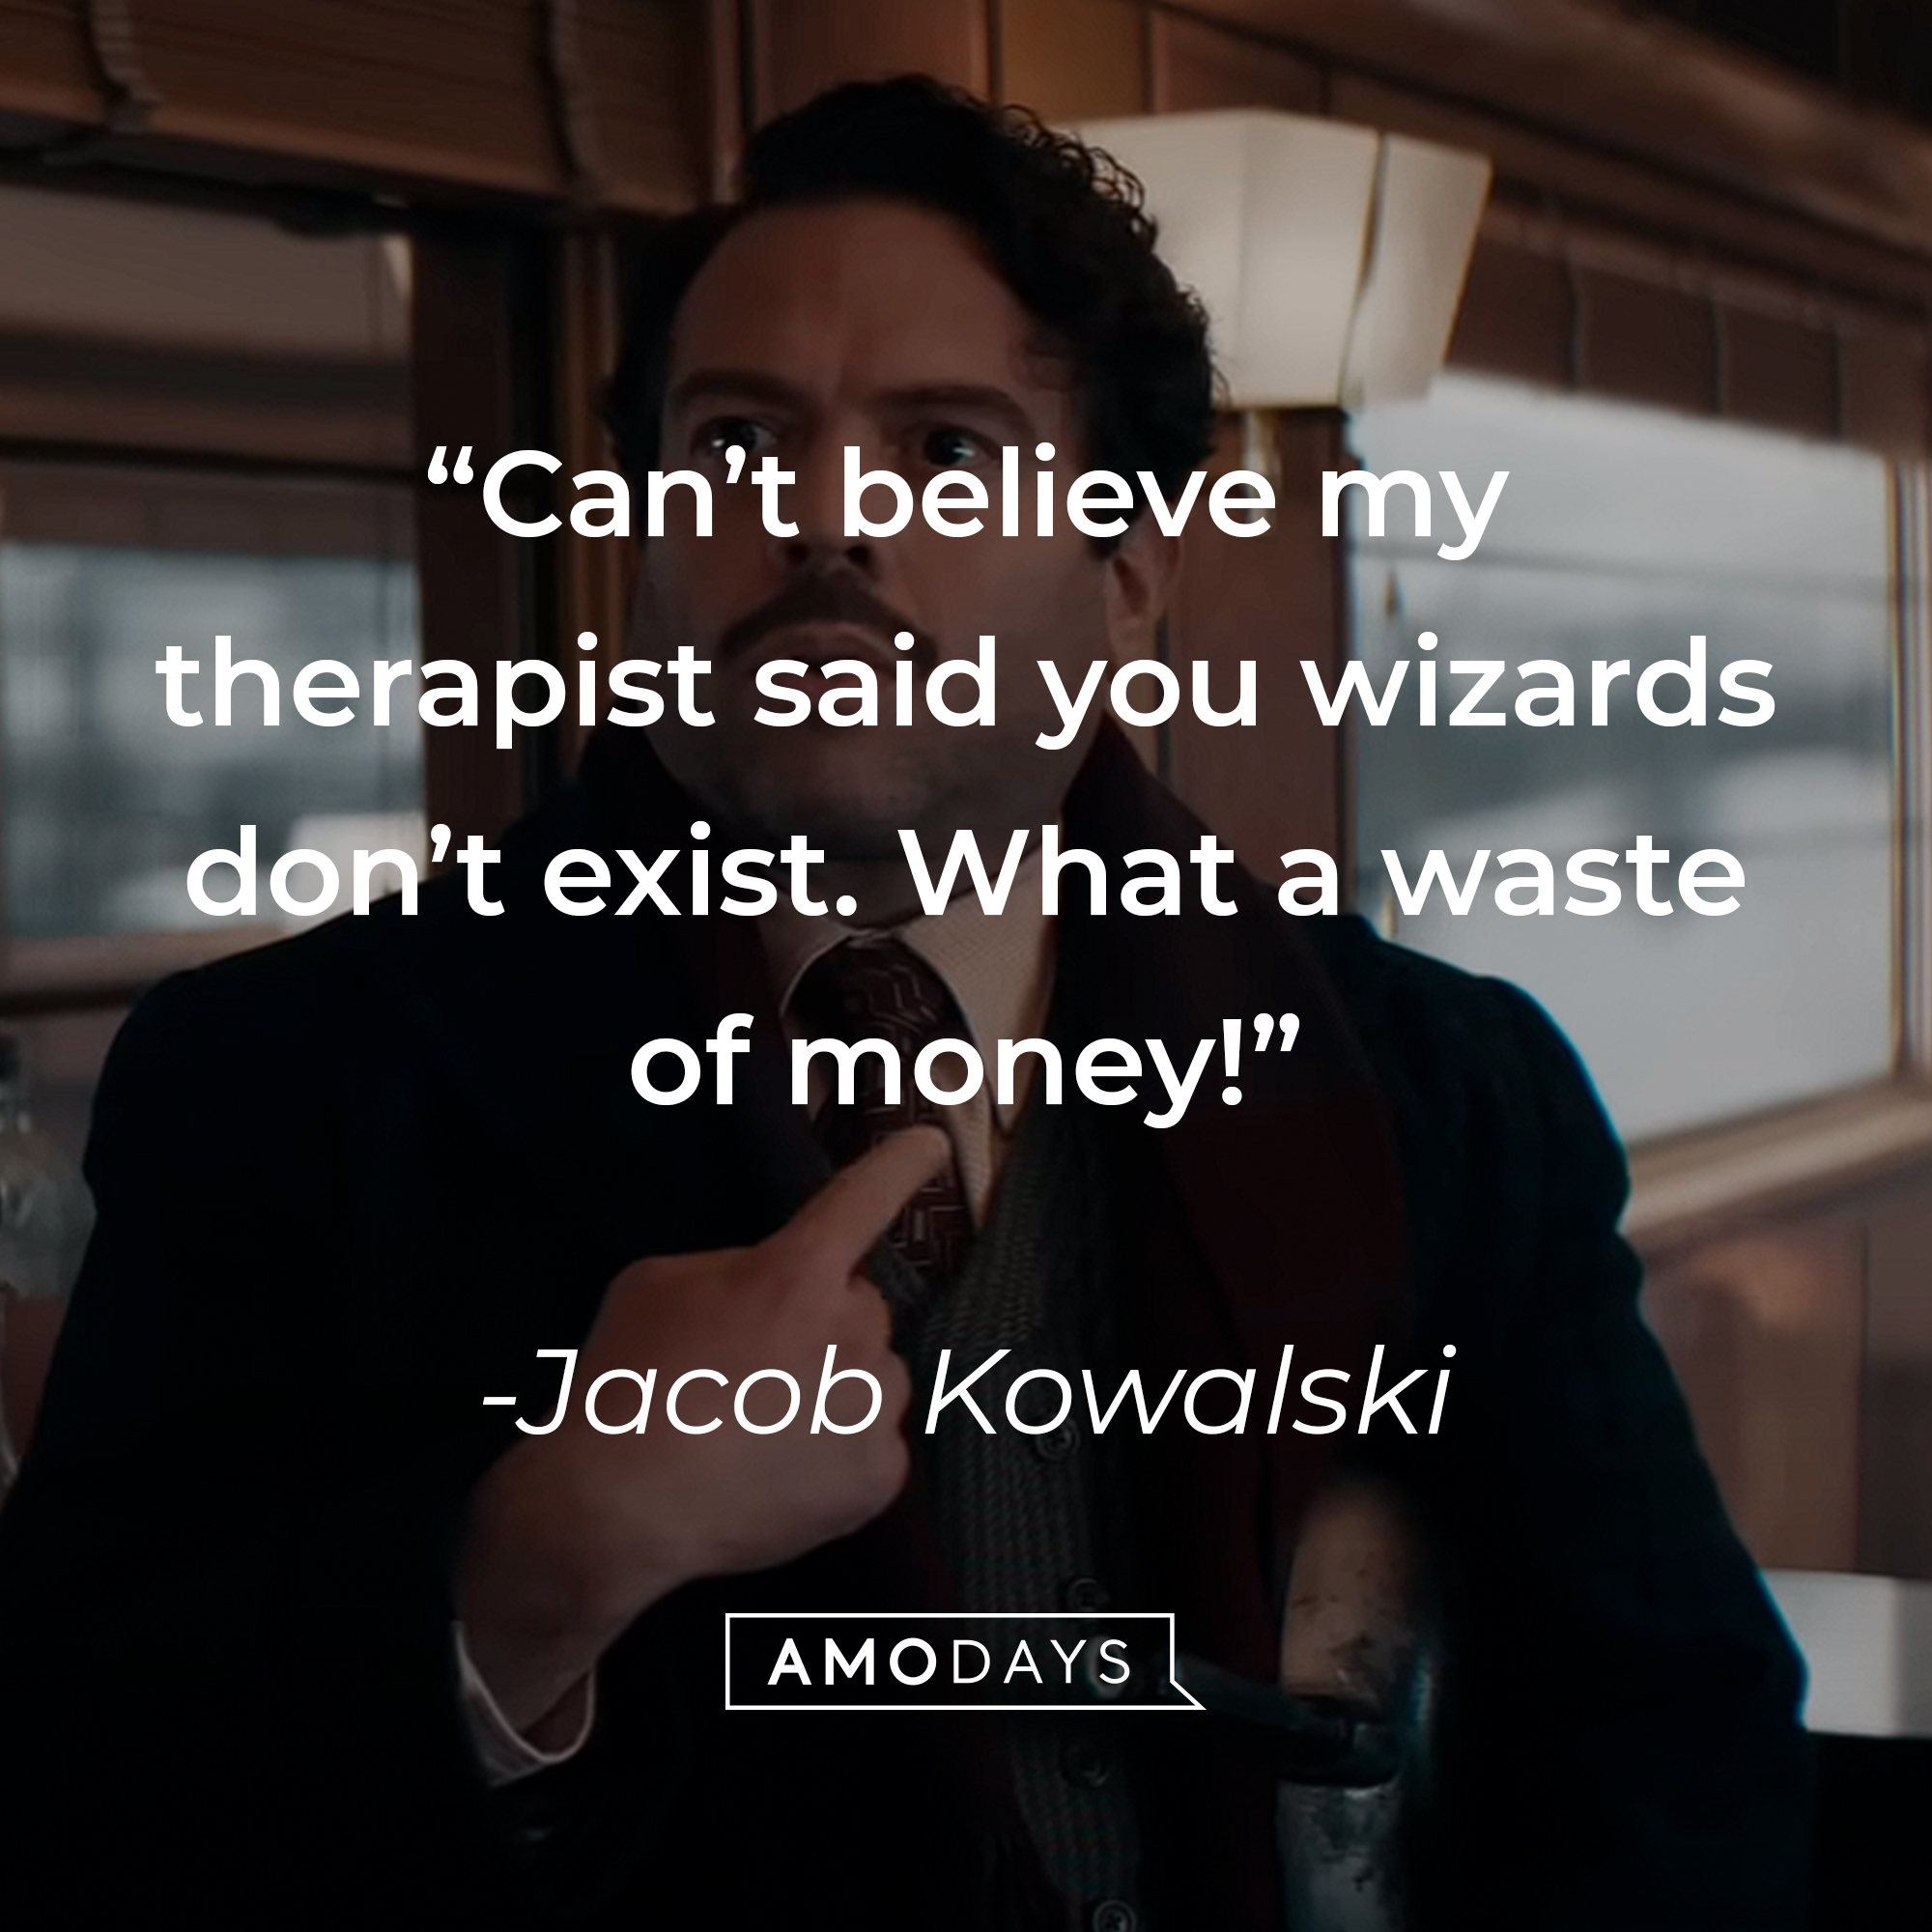 Jacob Kowalski, with his quote: “Can’t believe my therapist said you wizards don’t exist. What a waste of money!” | Source: Youtube.com/WarnerBrosPictures